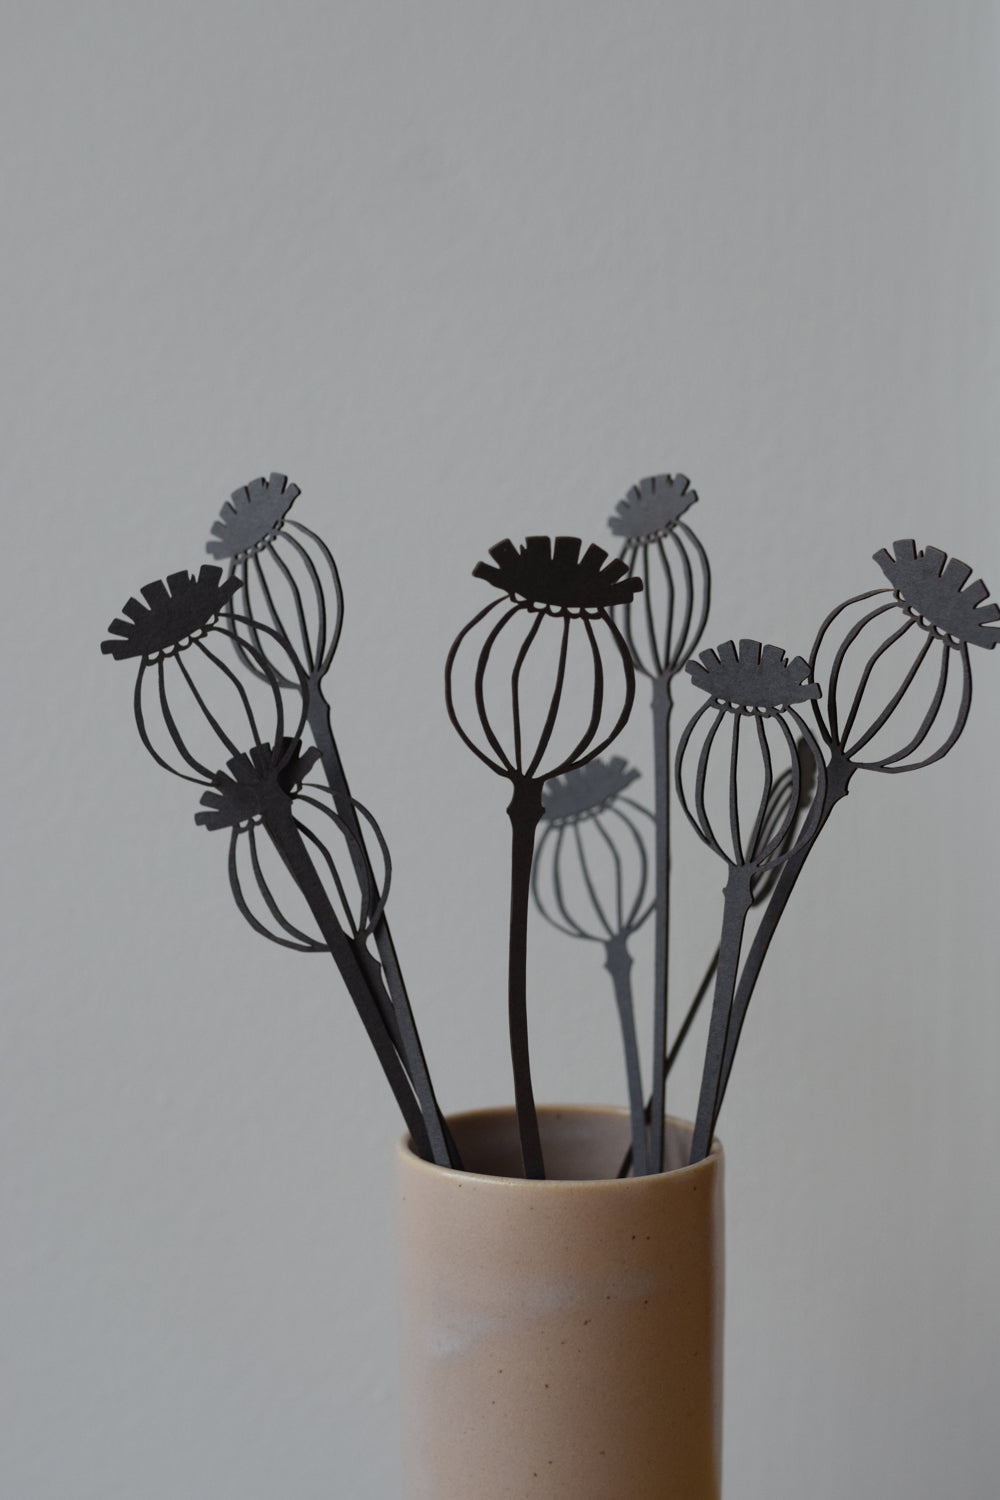 A bunch of Poppy Seed Heads